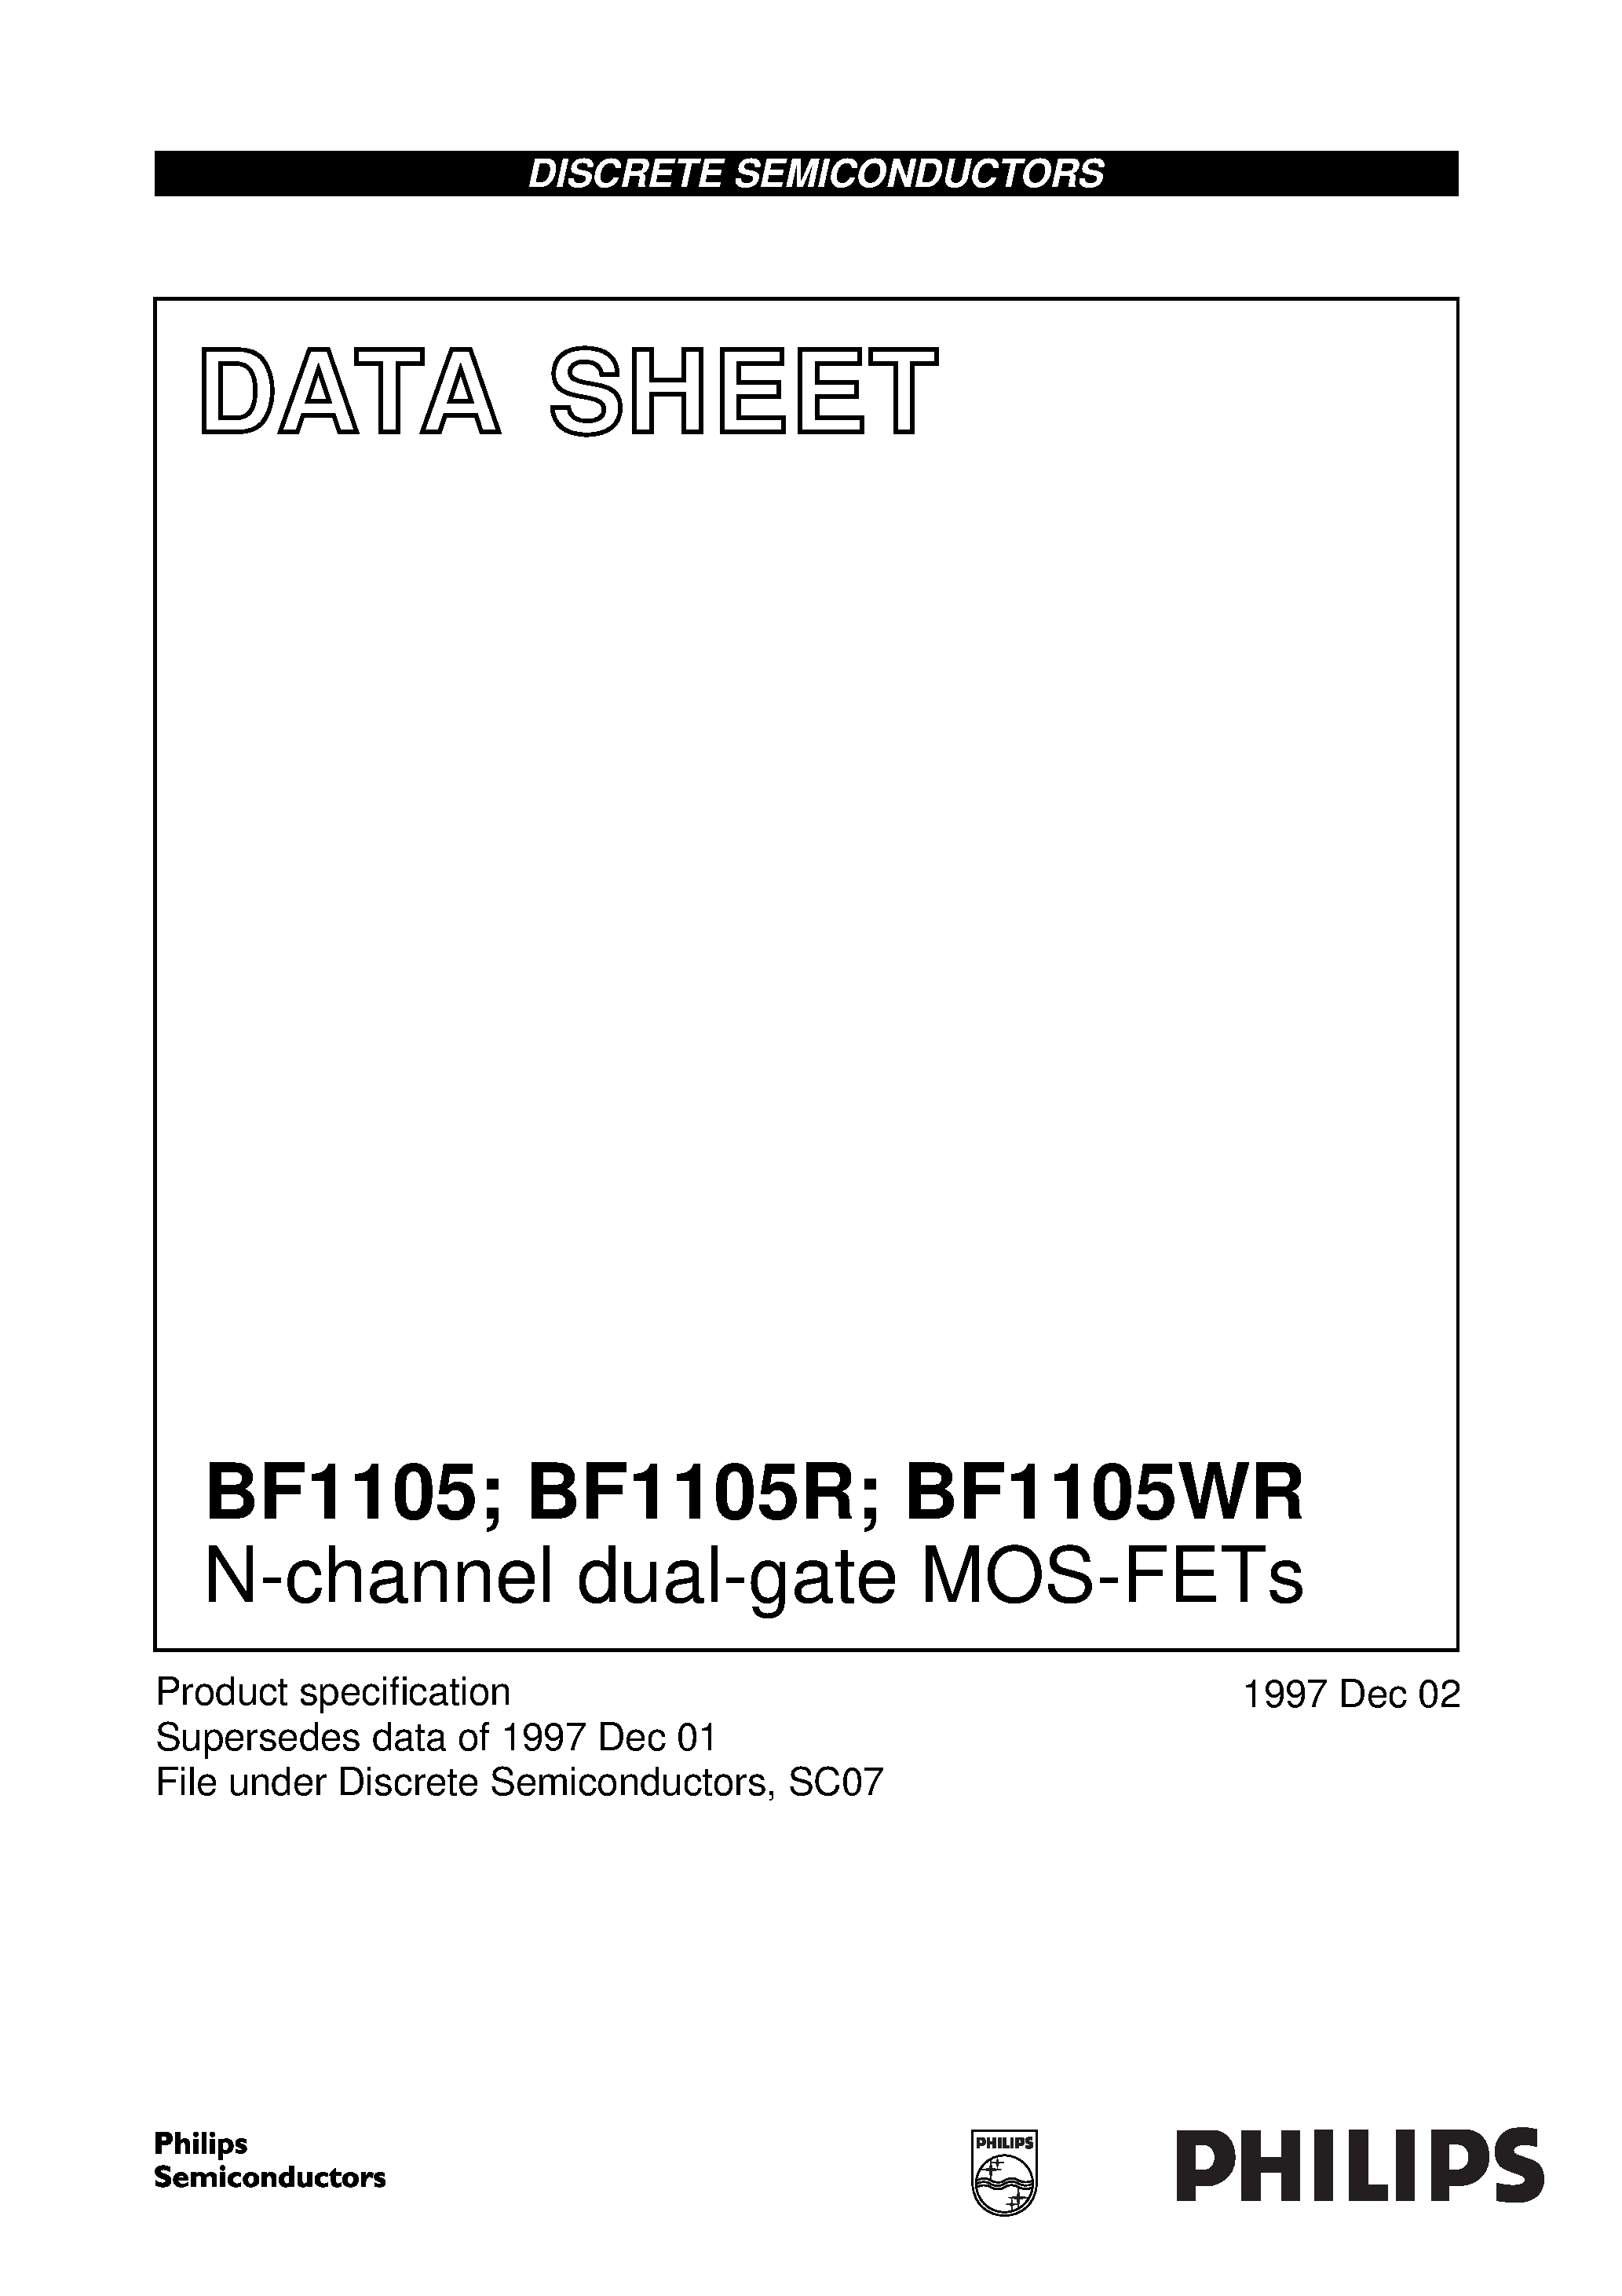 Datasheet BF1105WR - N-channel dual-gate MOS-FETs page 1